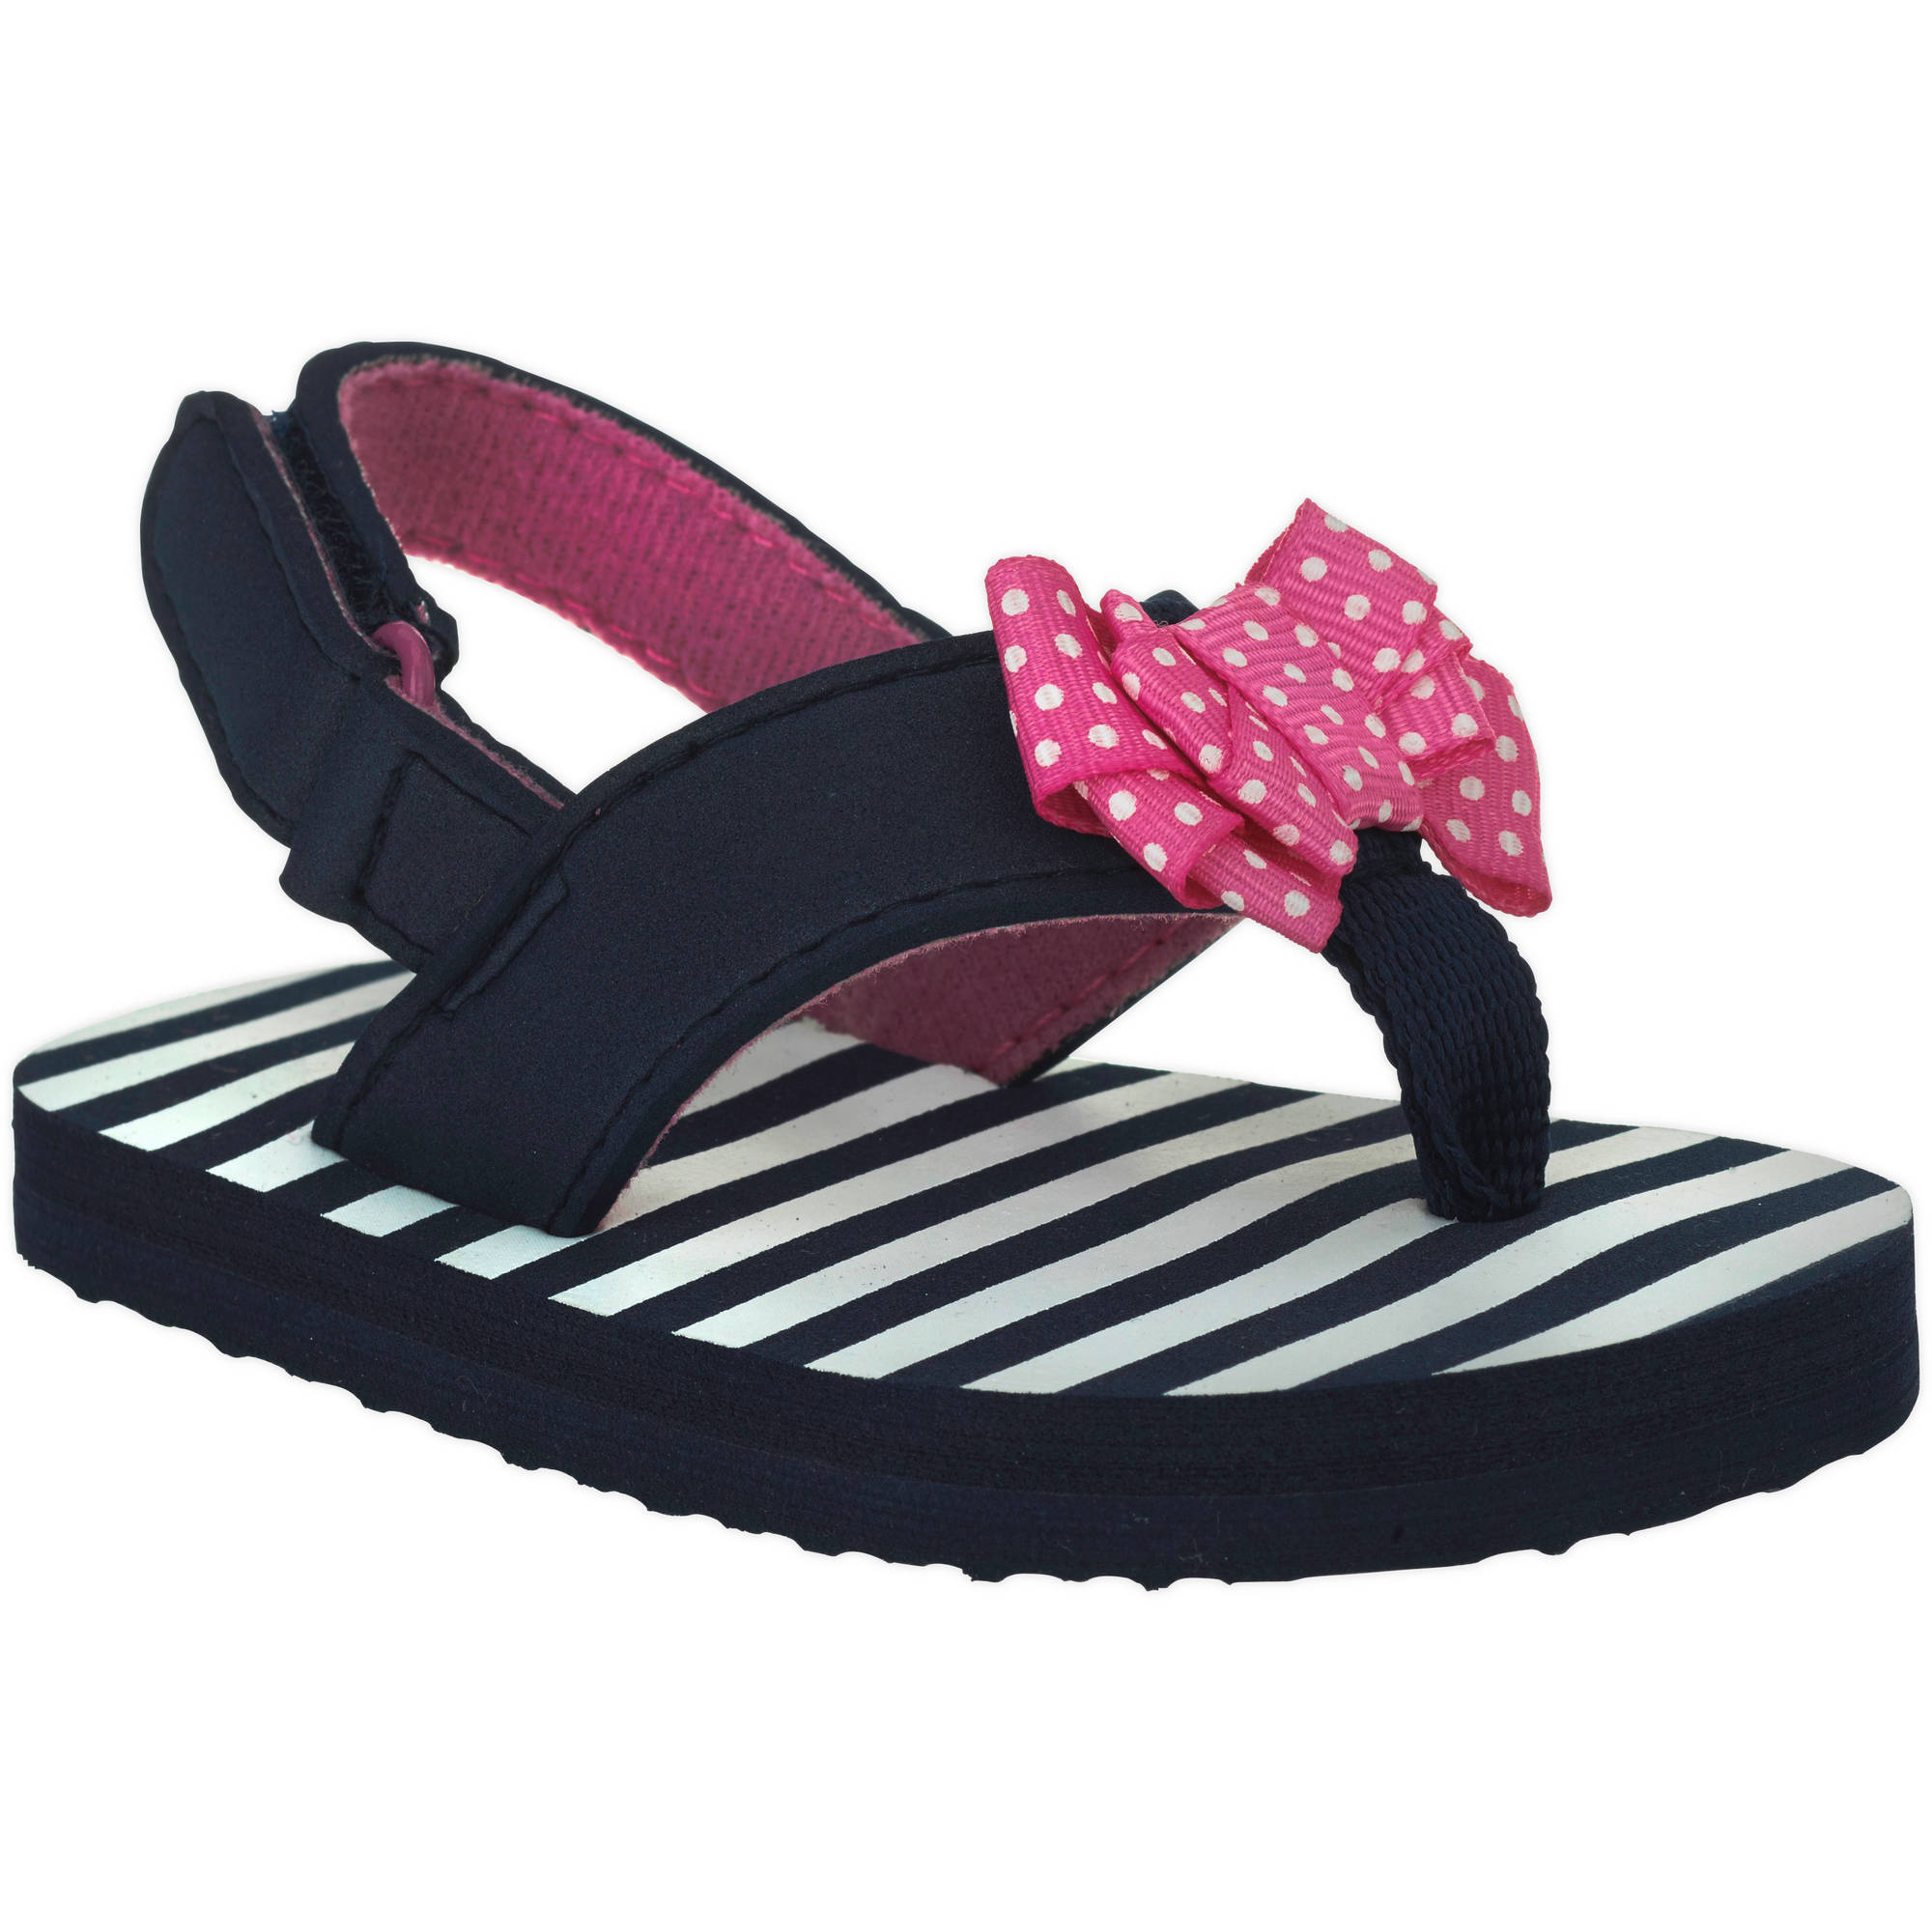 Garanamial Infant Girls' Bow Accent Sandal - image 1 of 5